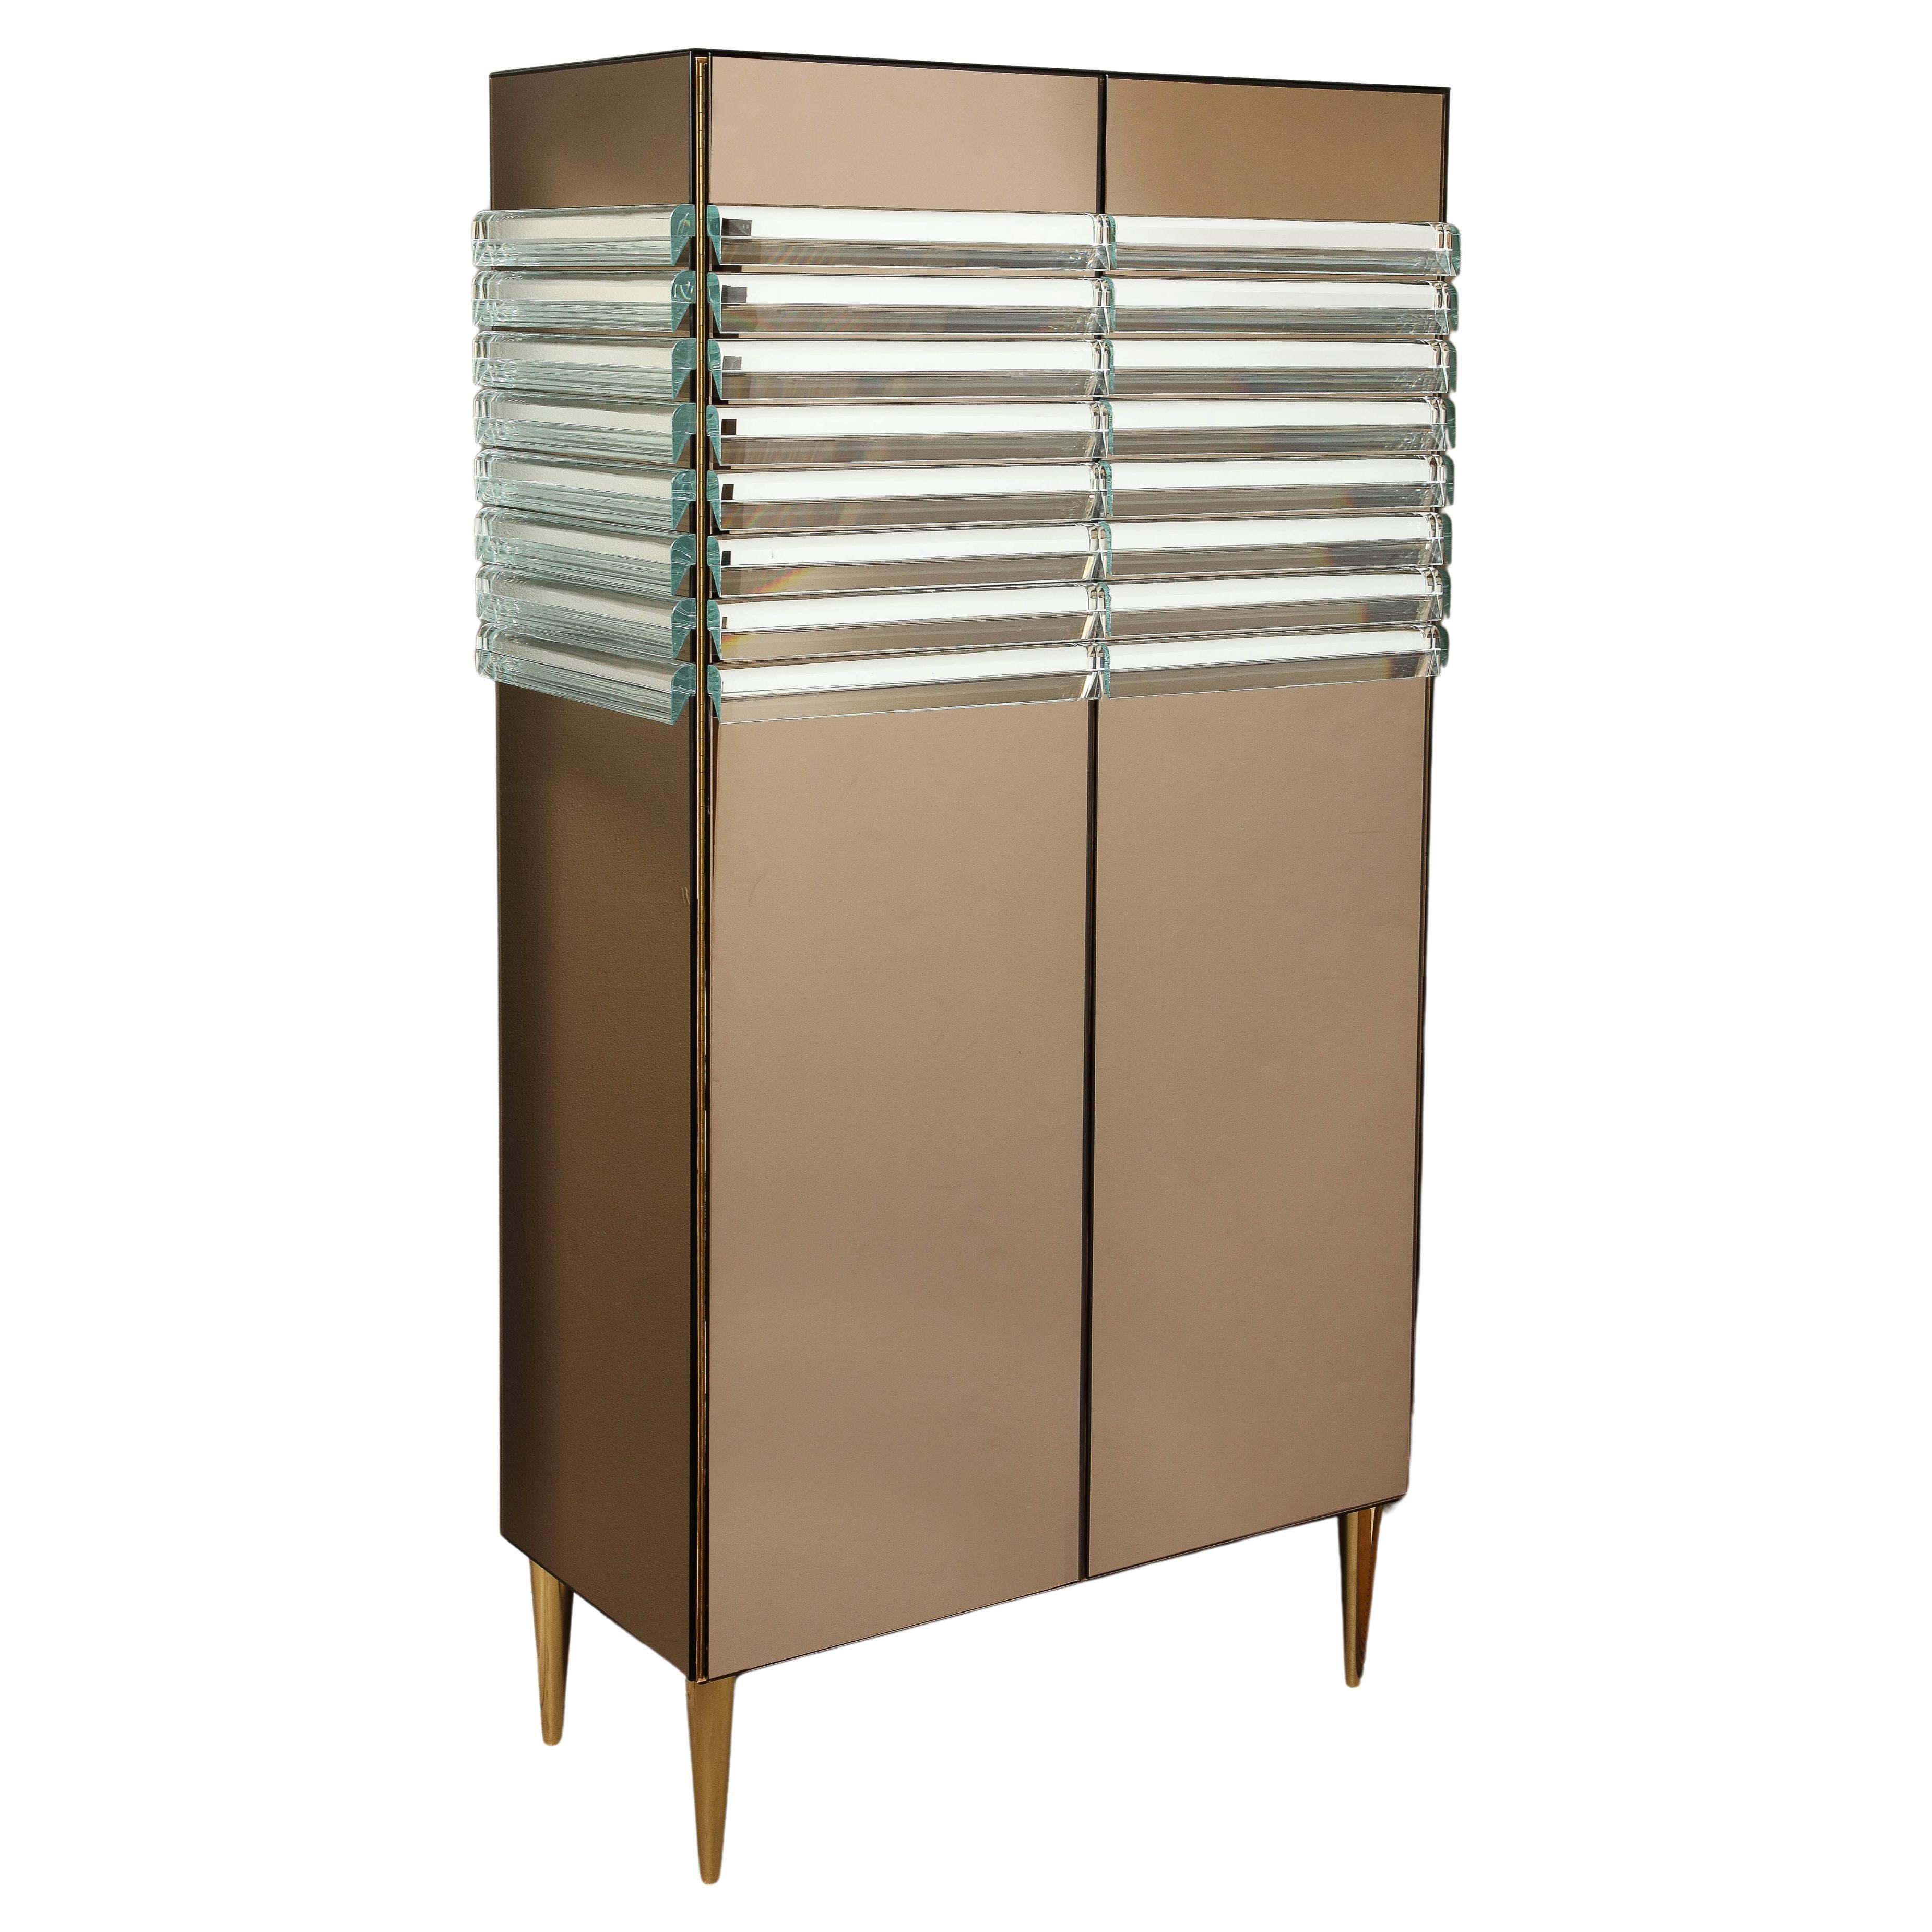 One-of-a-kind Crystal and Bronze Mirrored Tall Cabinet or Dry Bar with Brass Legs, Italy. This piece is versatile and can be used as a cabinet, wardrobe or dry bar. Hand-crafted, wooden, 2-door cabinet is clad or overlayed with bronze tinted